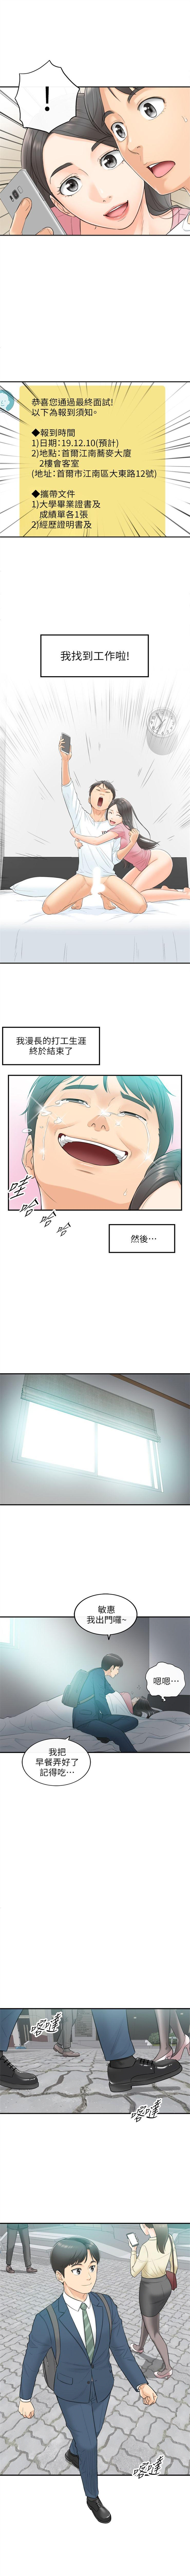 Shecock 正妹小主管 1-48 官方中文（連載中） Step Mom - Page 8